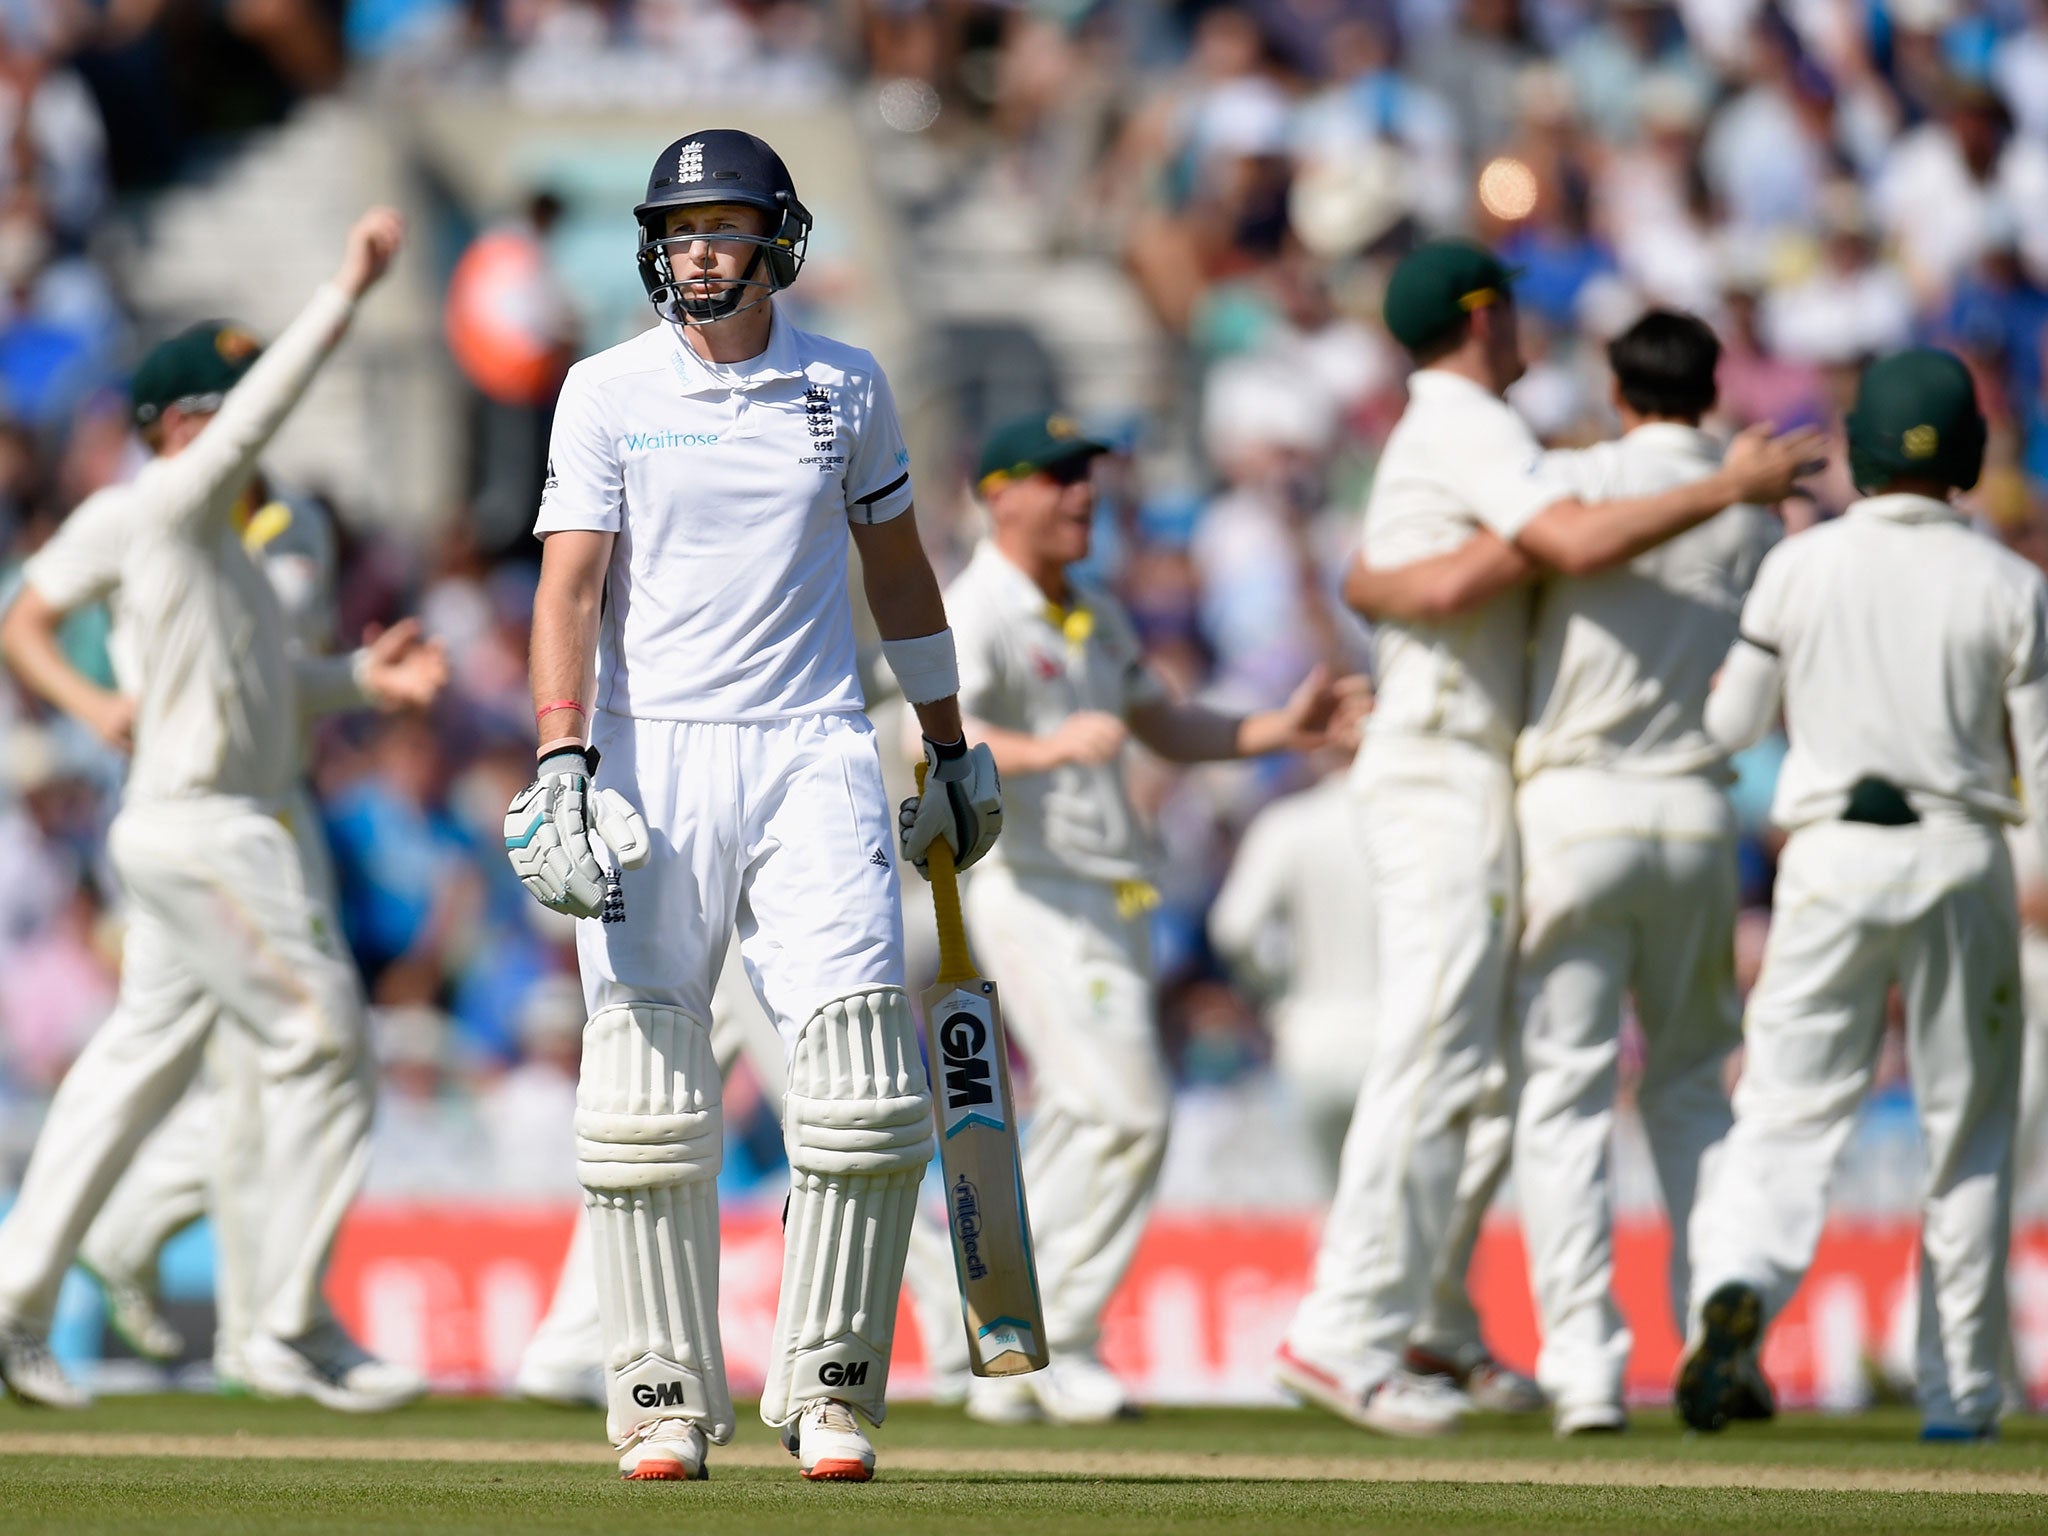 Joe Root is caught out on the boundary to leave England in trouble